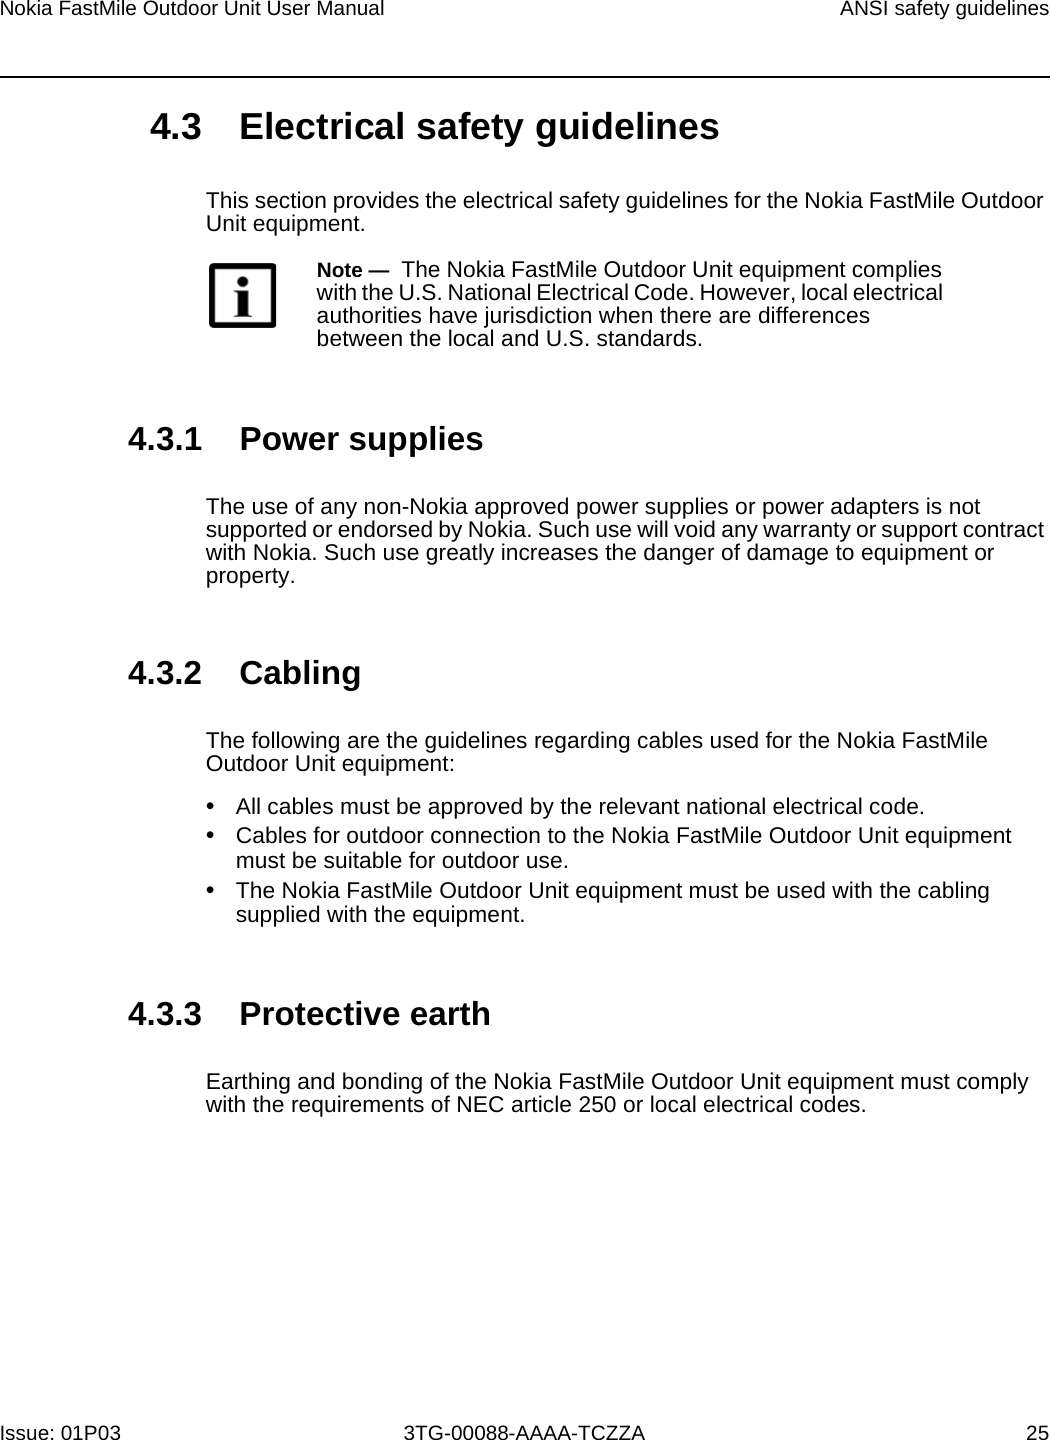 Page 23 of Nokia Bell 34003800FM20 FastMile Compact User Manual Nokia FastMile Outdoor Unit